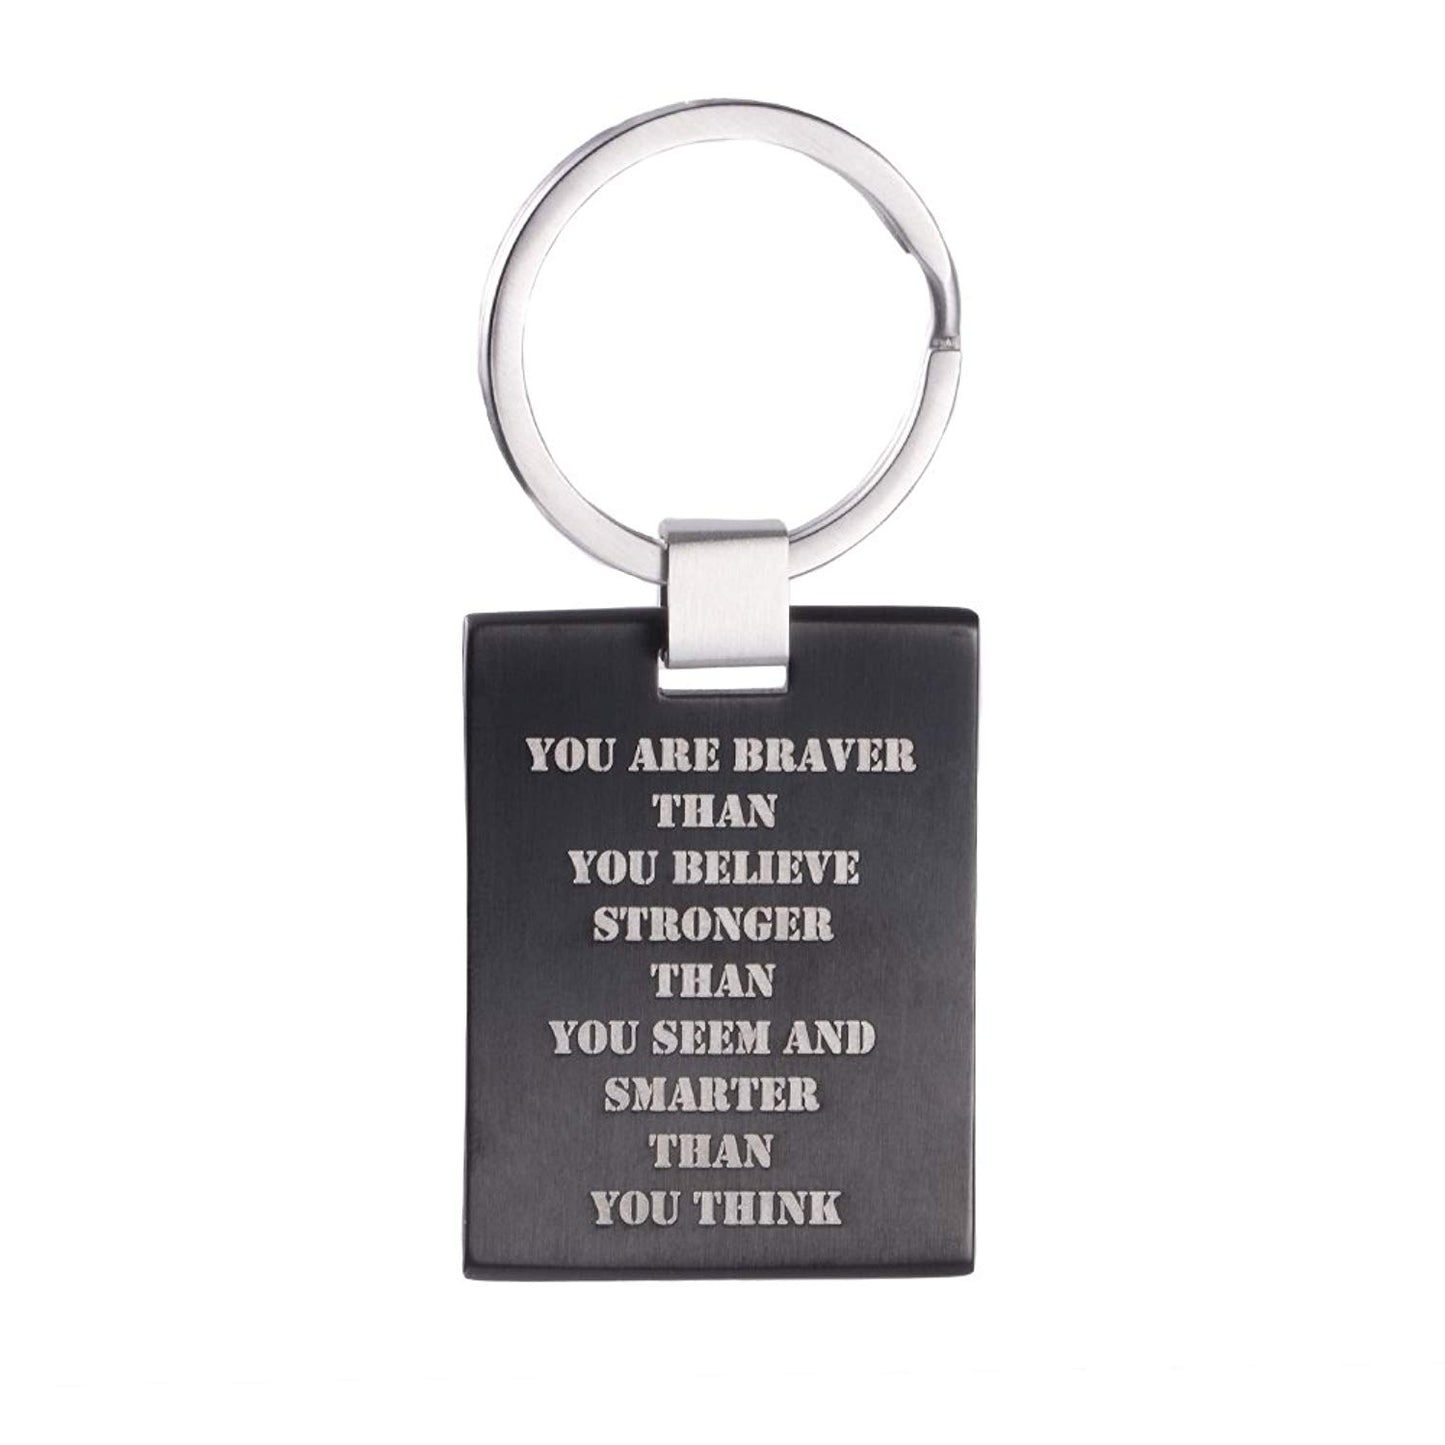 LinnaLove You are Braver than you Believe Stronger than you Seem and Smarter than you Think-Inspirational Dog Tags KeyChains (KTY3)